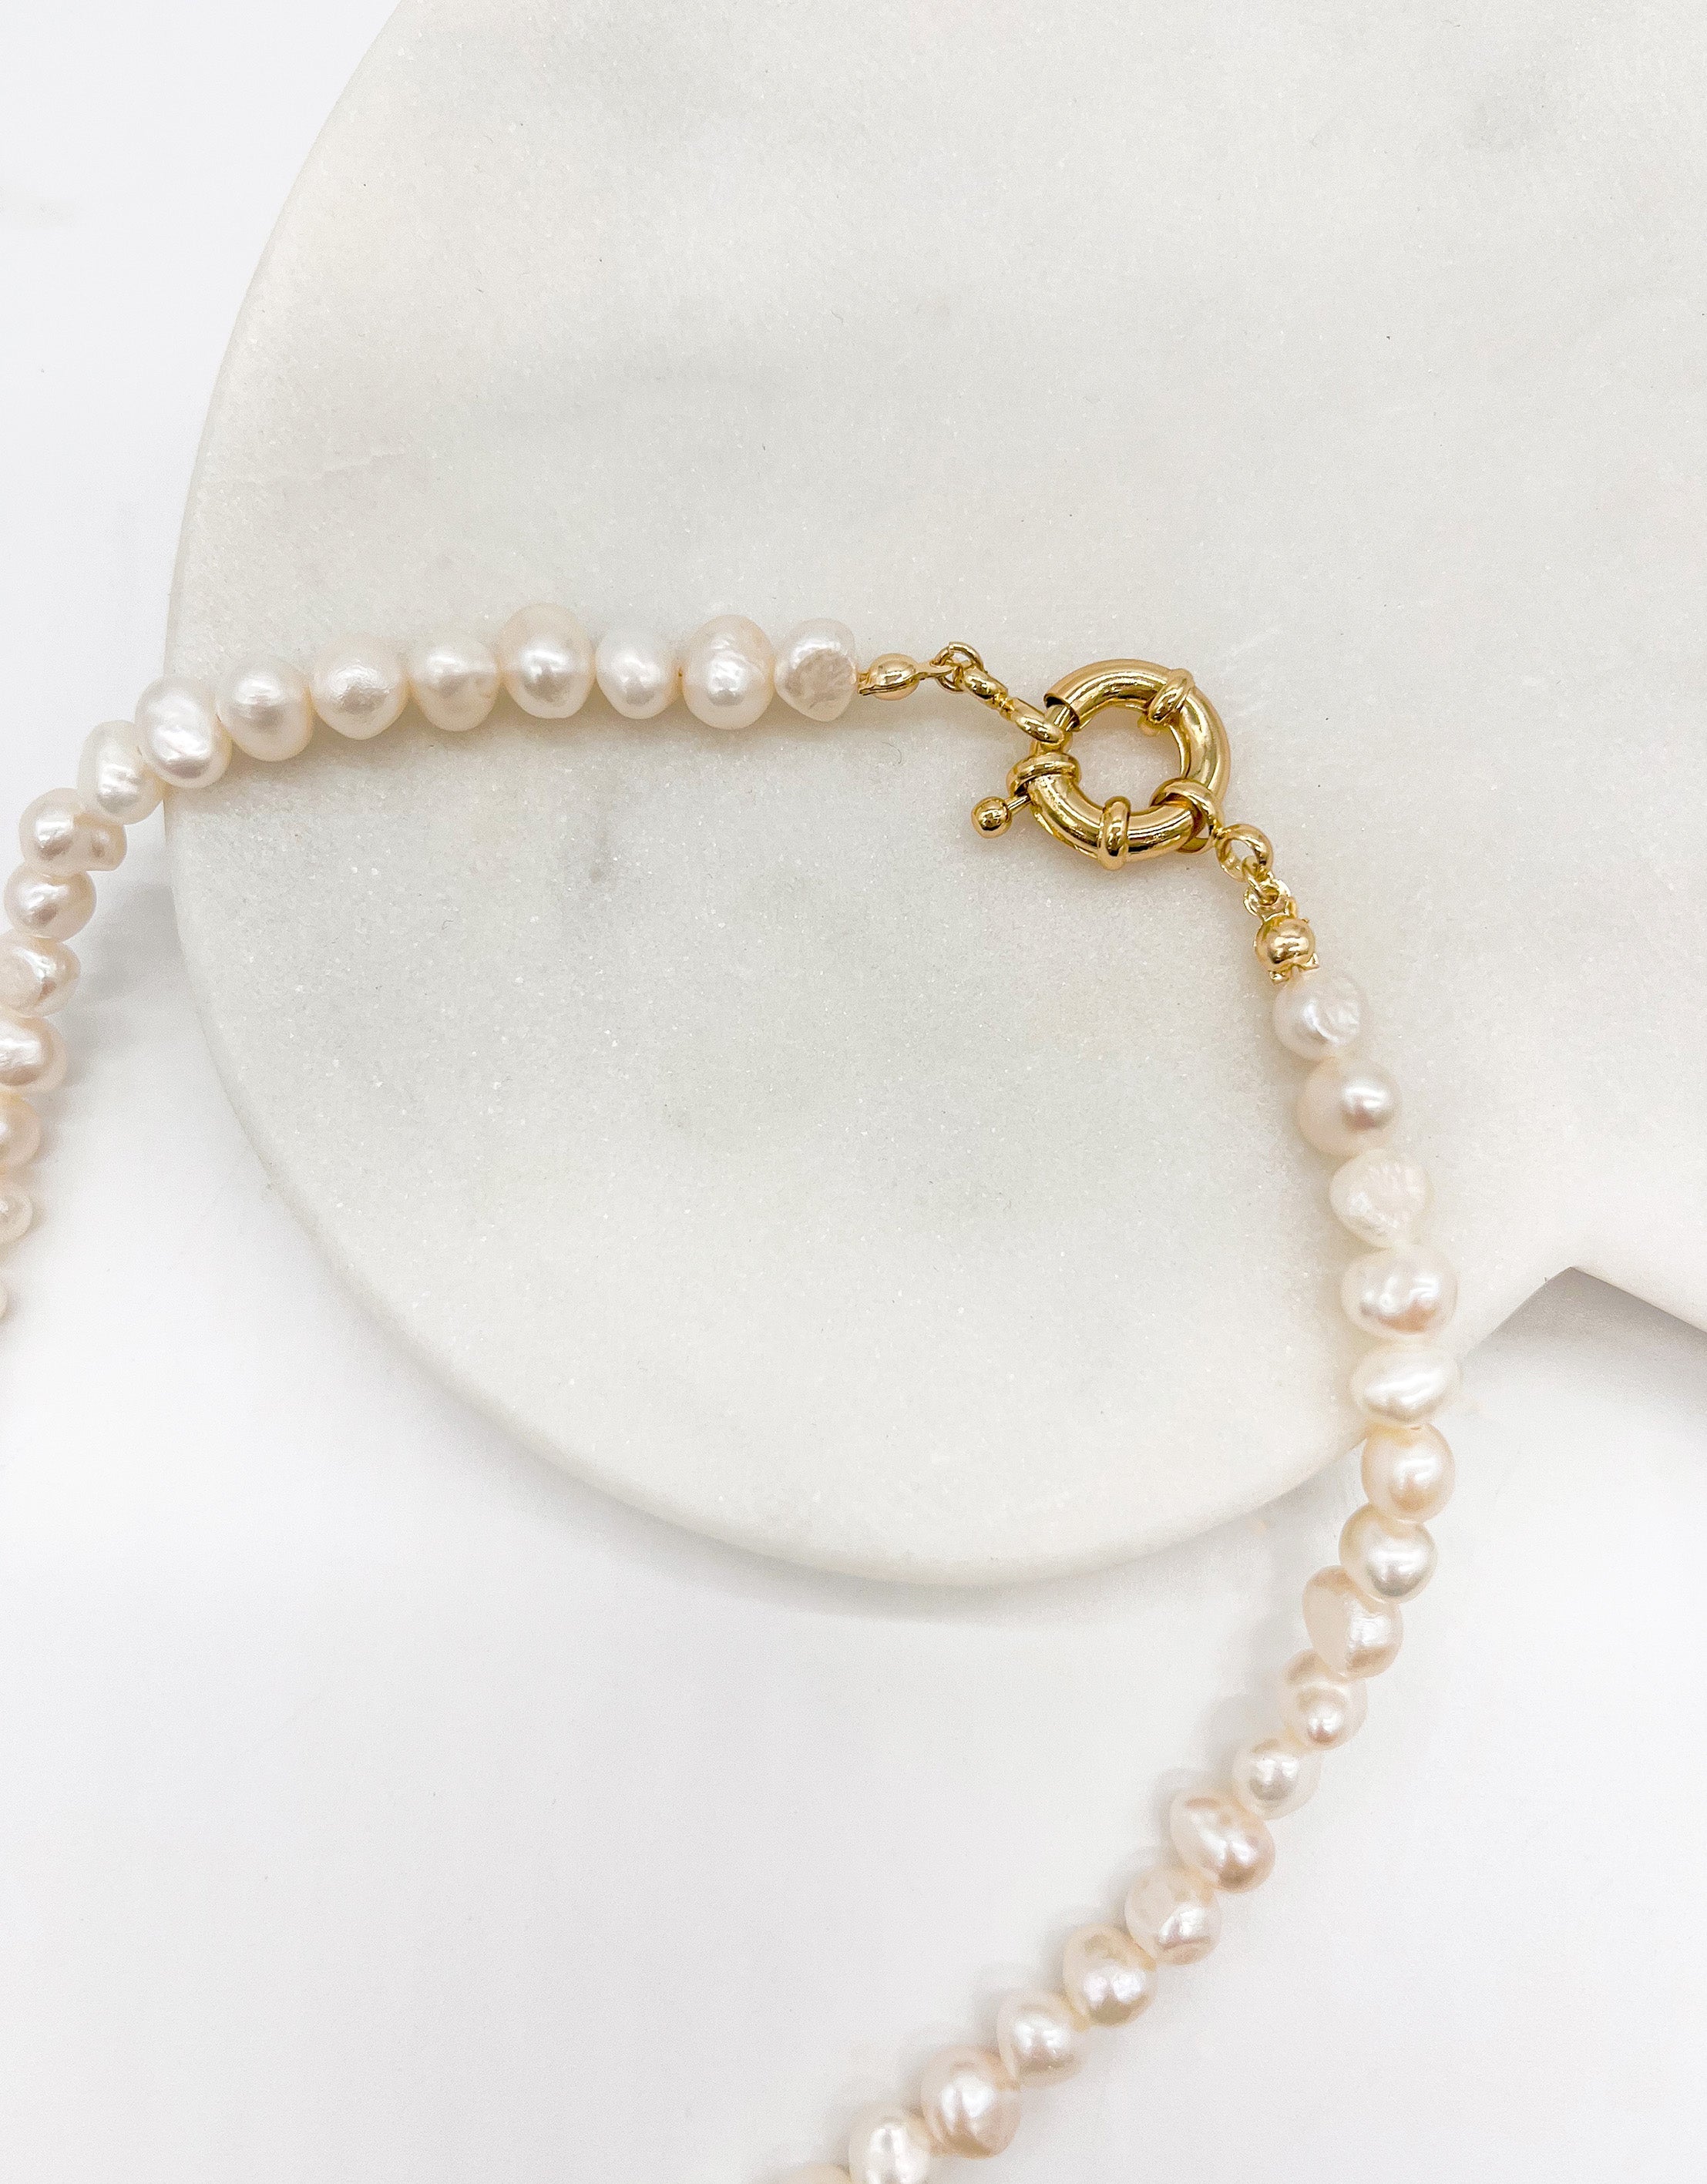 Mikimoto Pearl Necklace Strand 24 18K Yellow Gold Clasp 6.75 mm 100%  Authentic